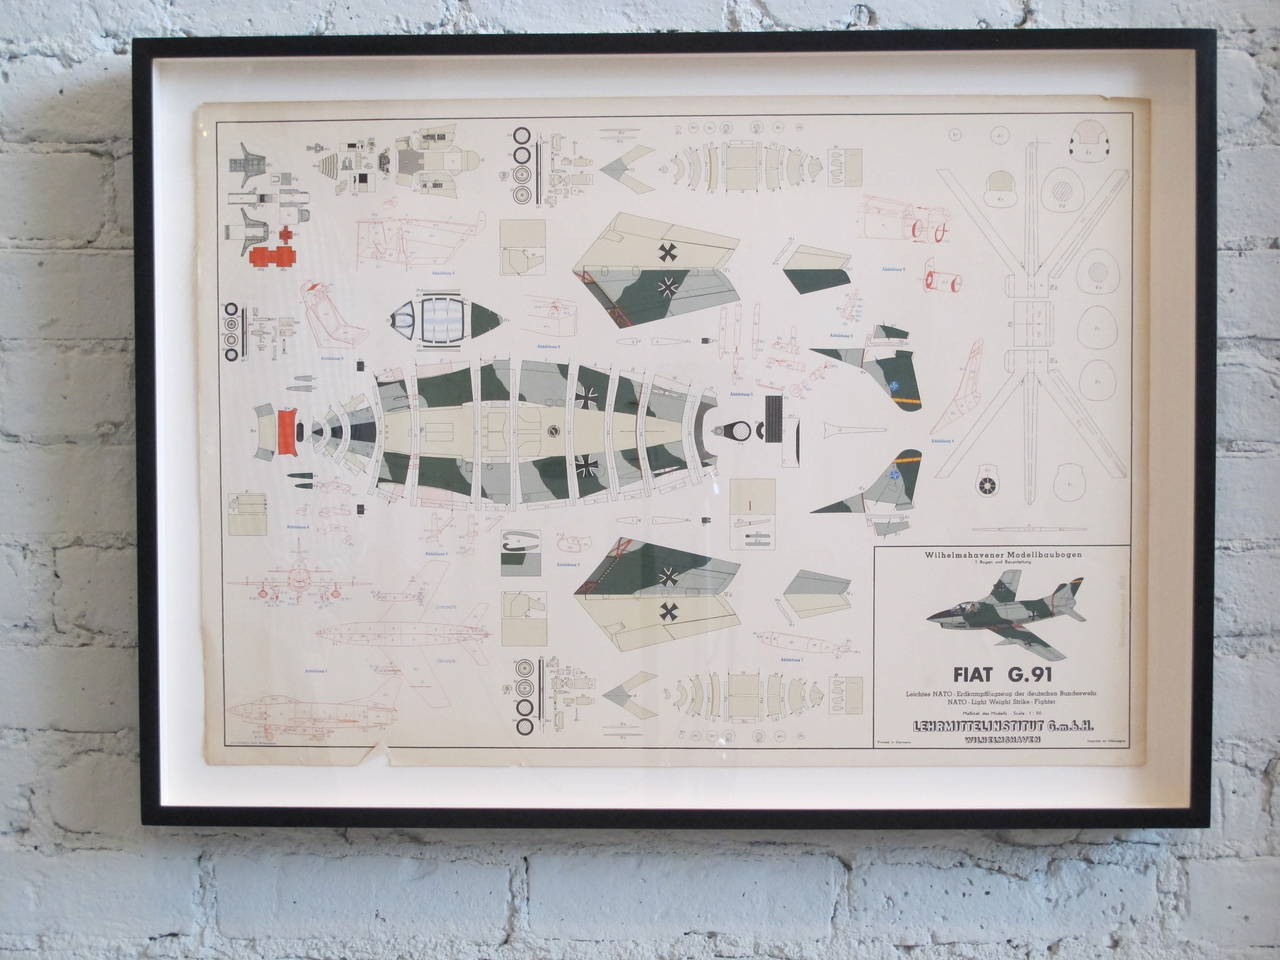 Vintage model of a Fiat G-91, newly framed in a black hand-painted frame, on acid free board under UV protective acrylic. Dimensions below are for the frame, print measures 23.5